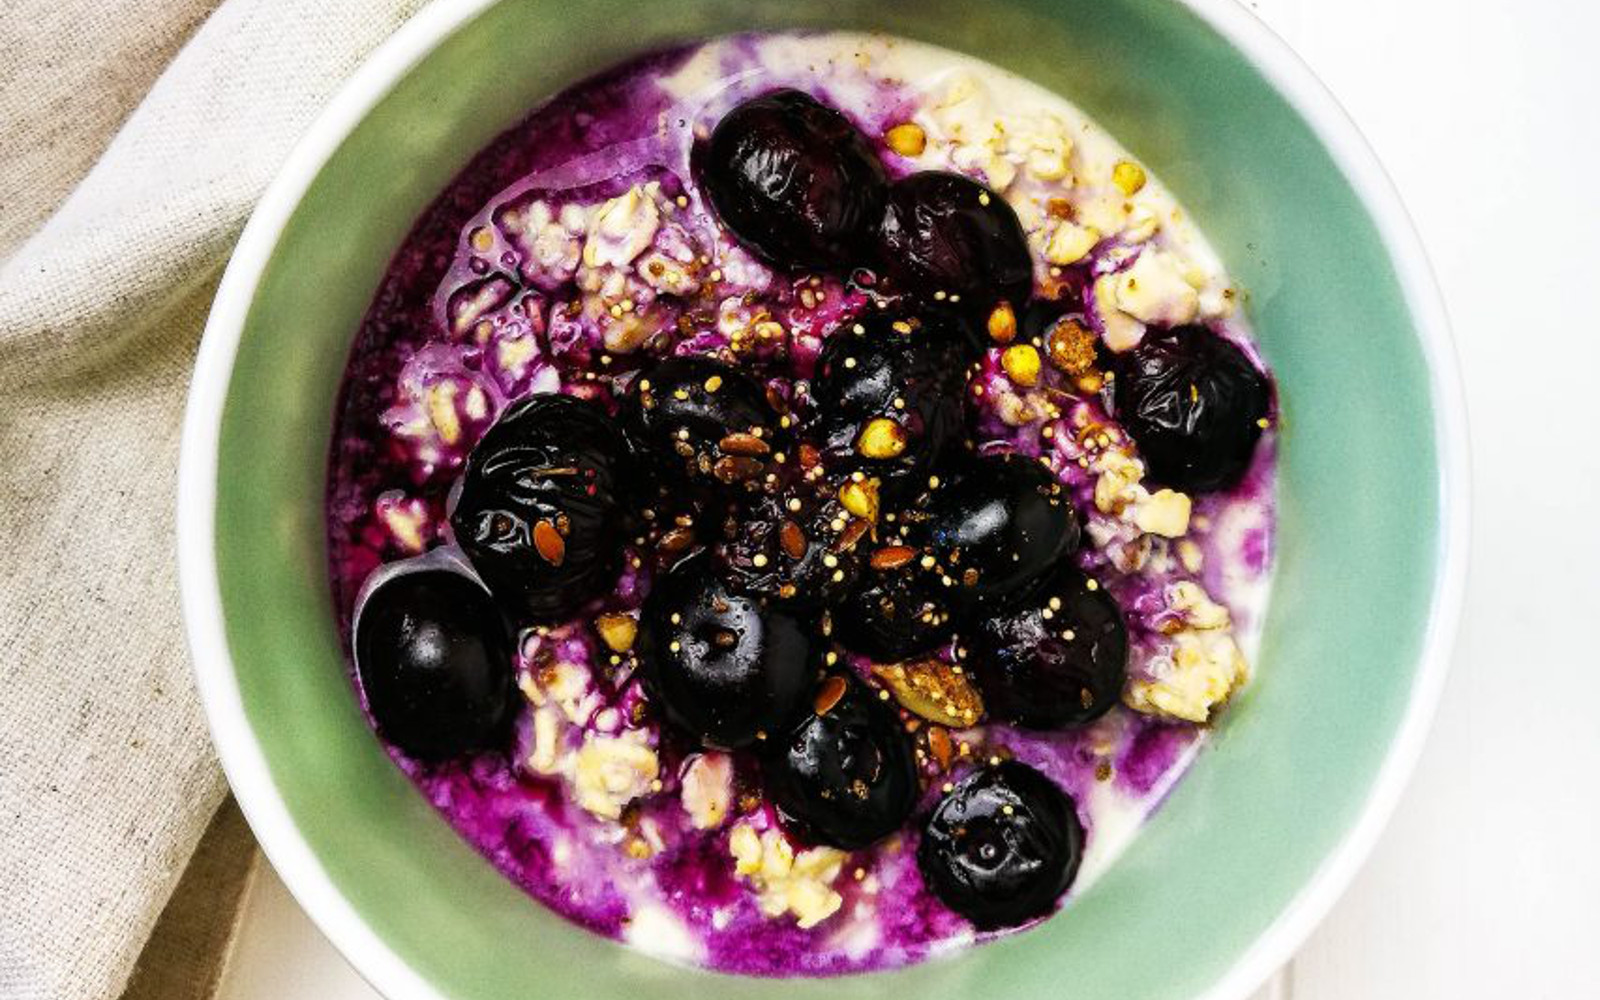 Vegan Gluten-Free Warm Blueberry Overnight Oats with compote